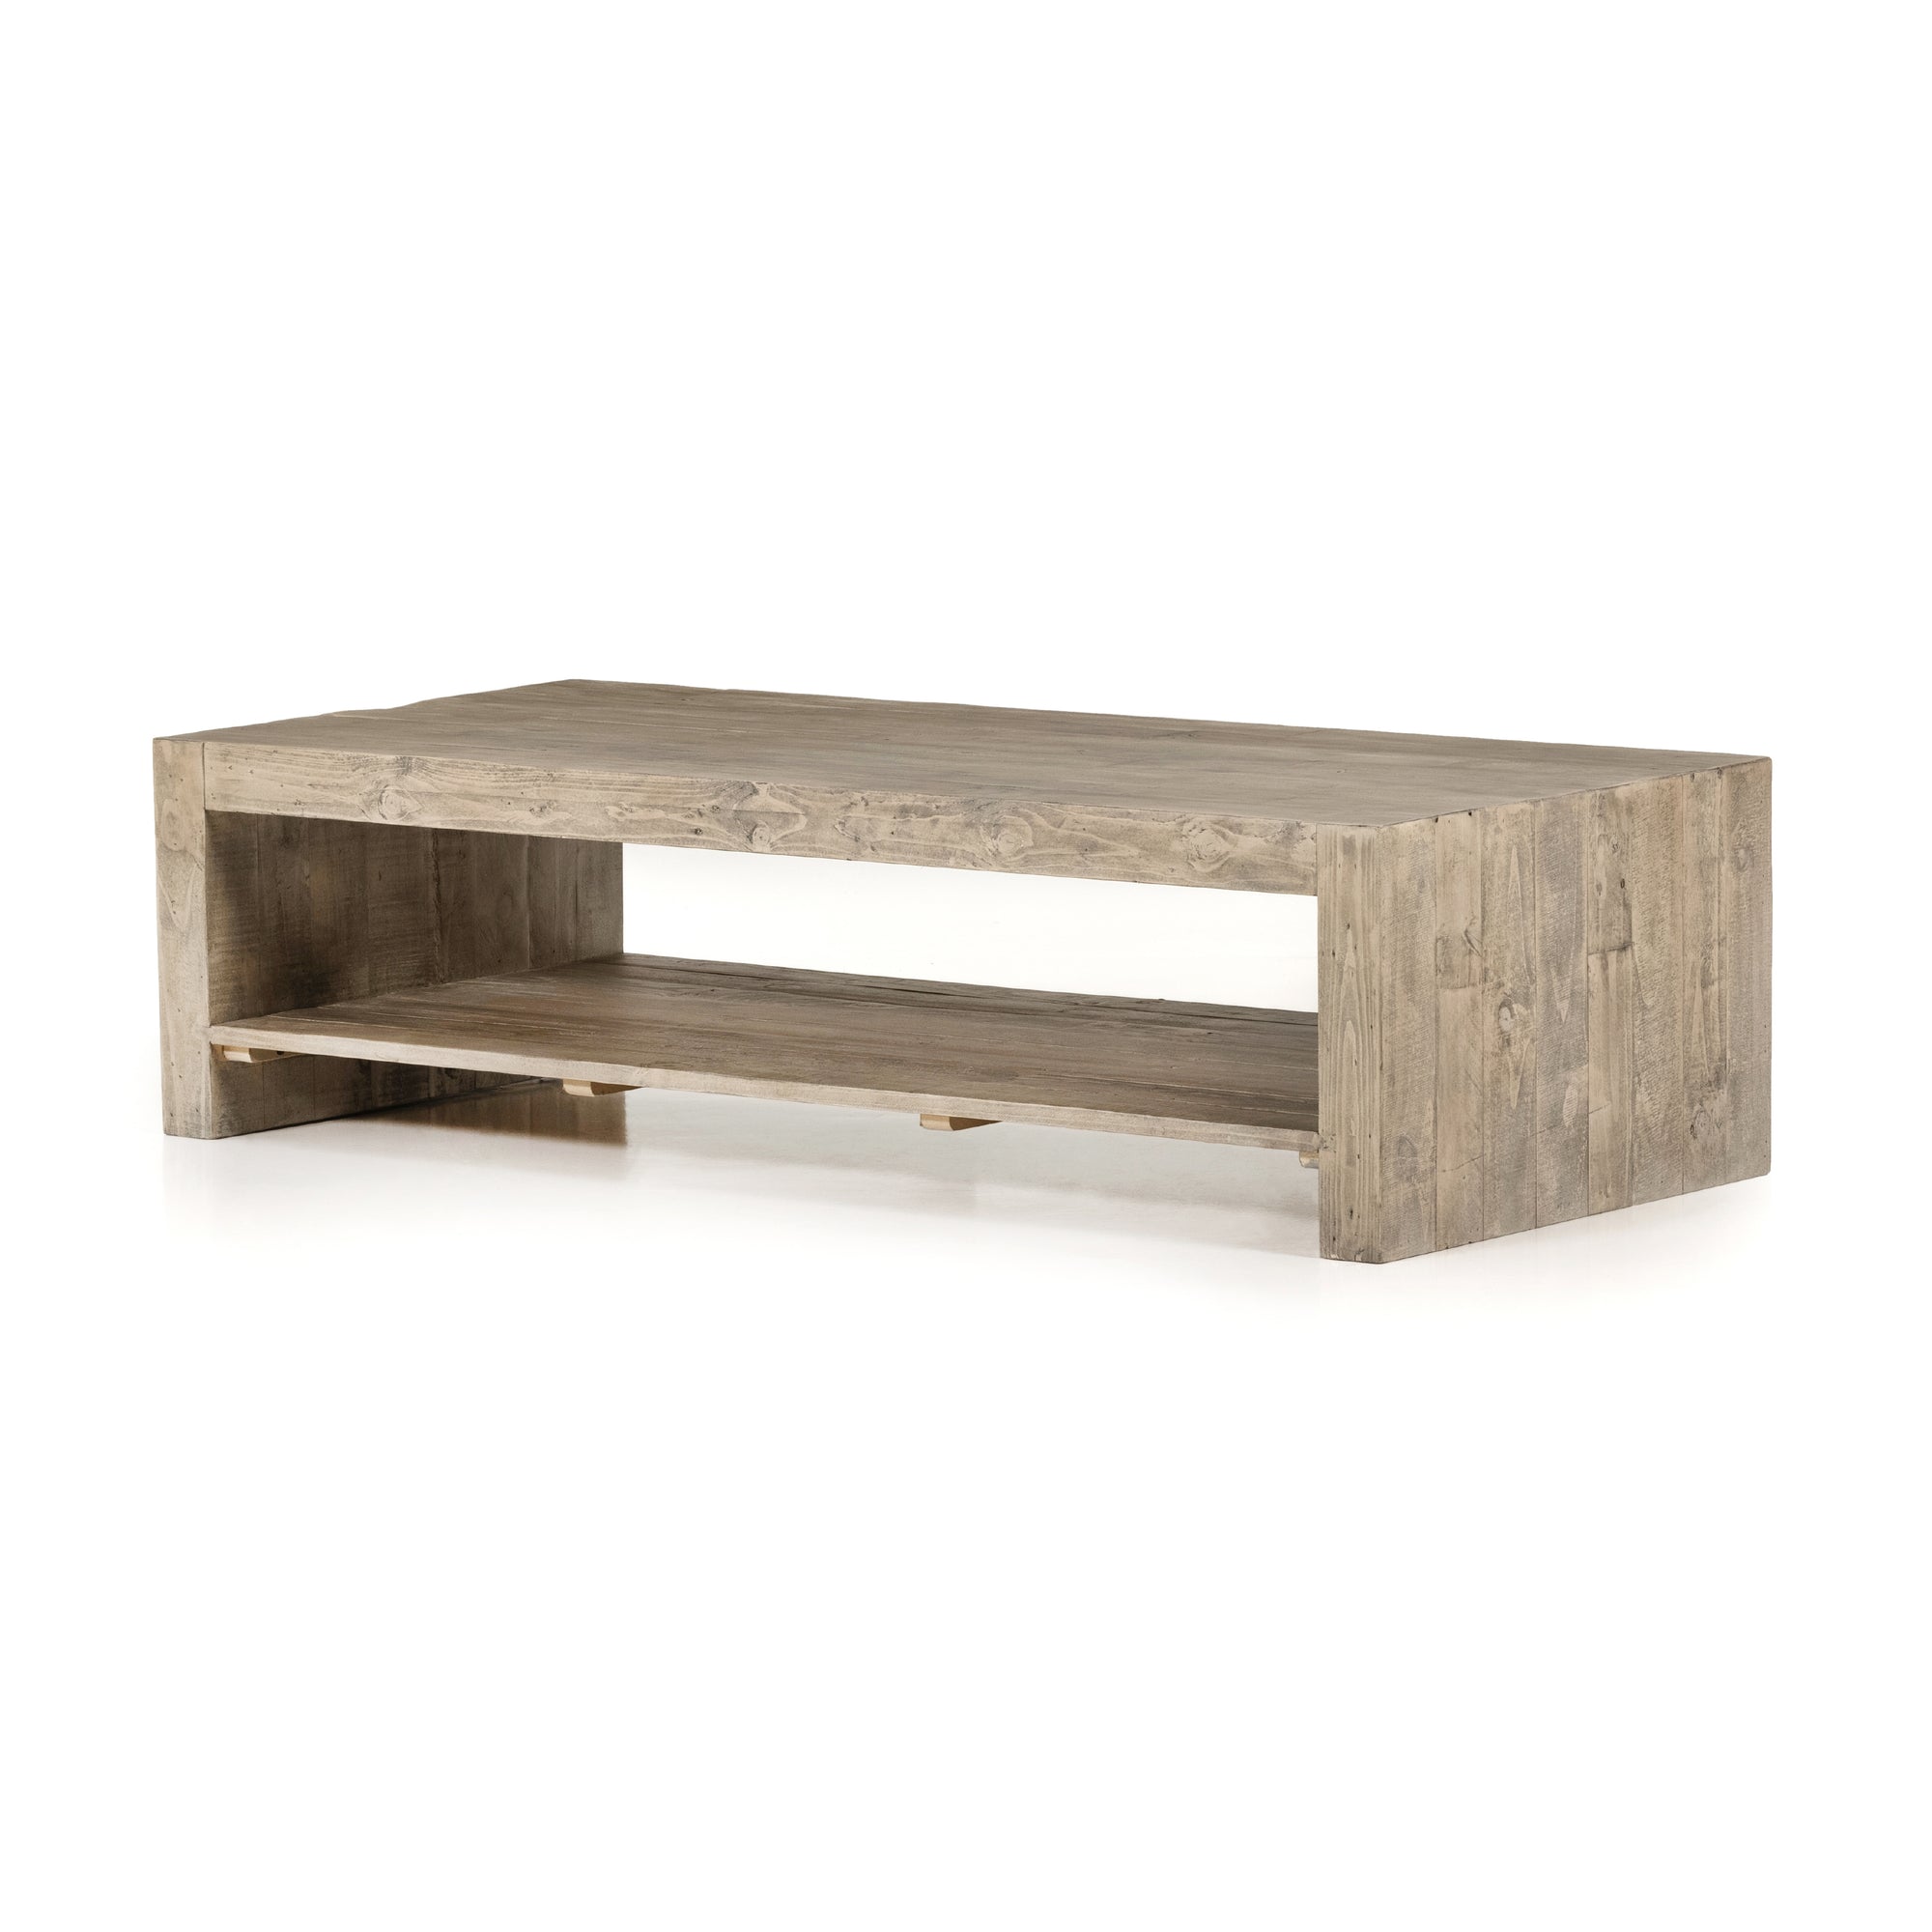 Beckette Coffee Table